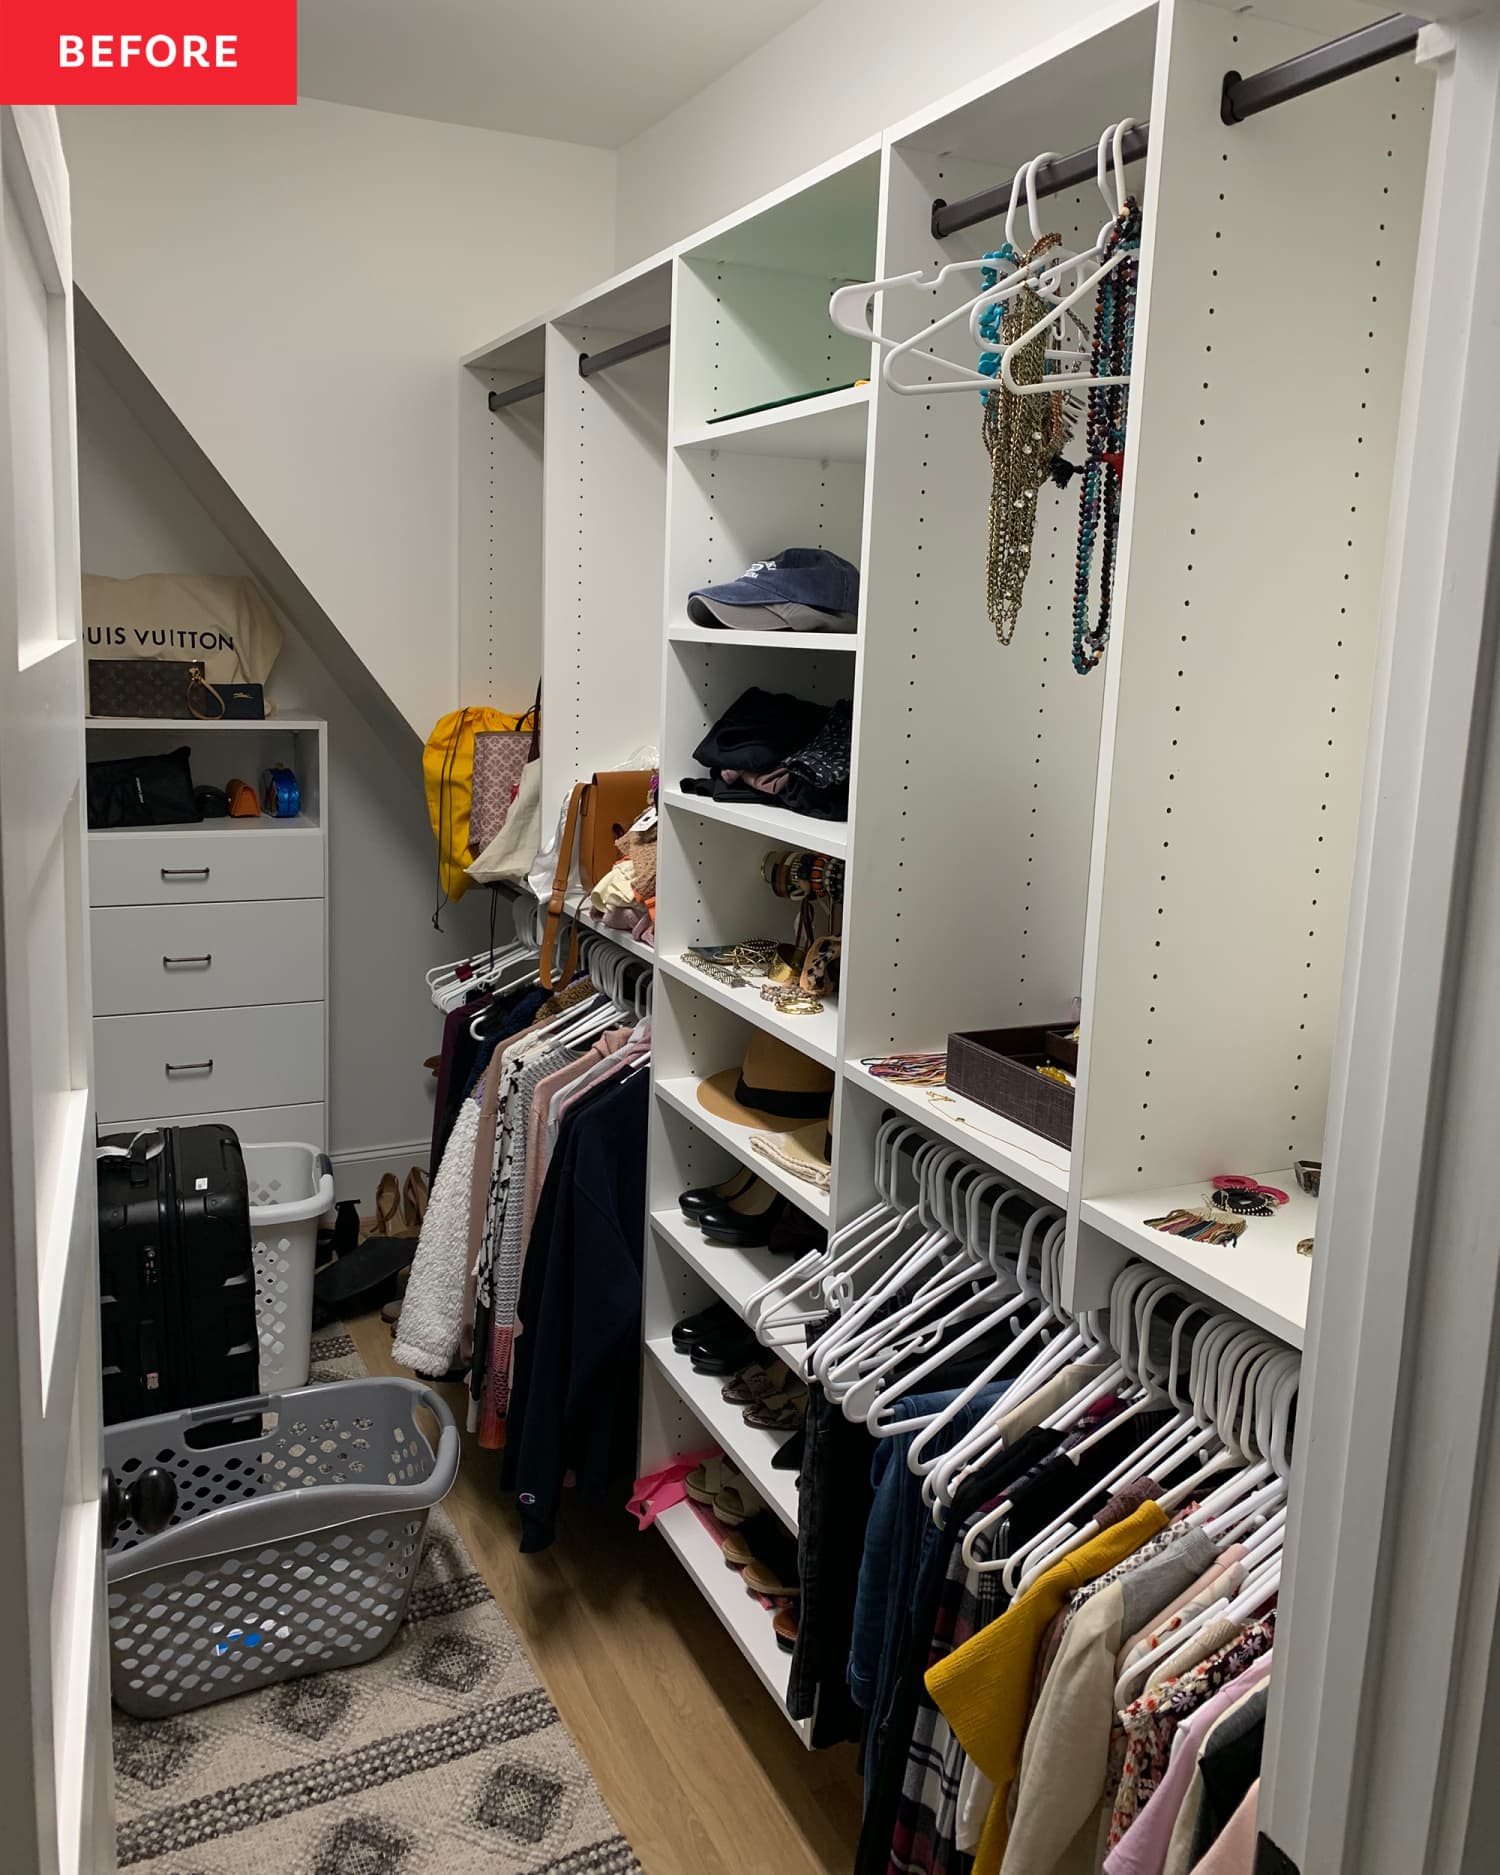 Before and After: See How a Pro Organizer Revamps This Messy, Underutilized Closet